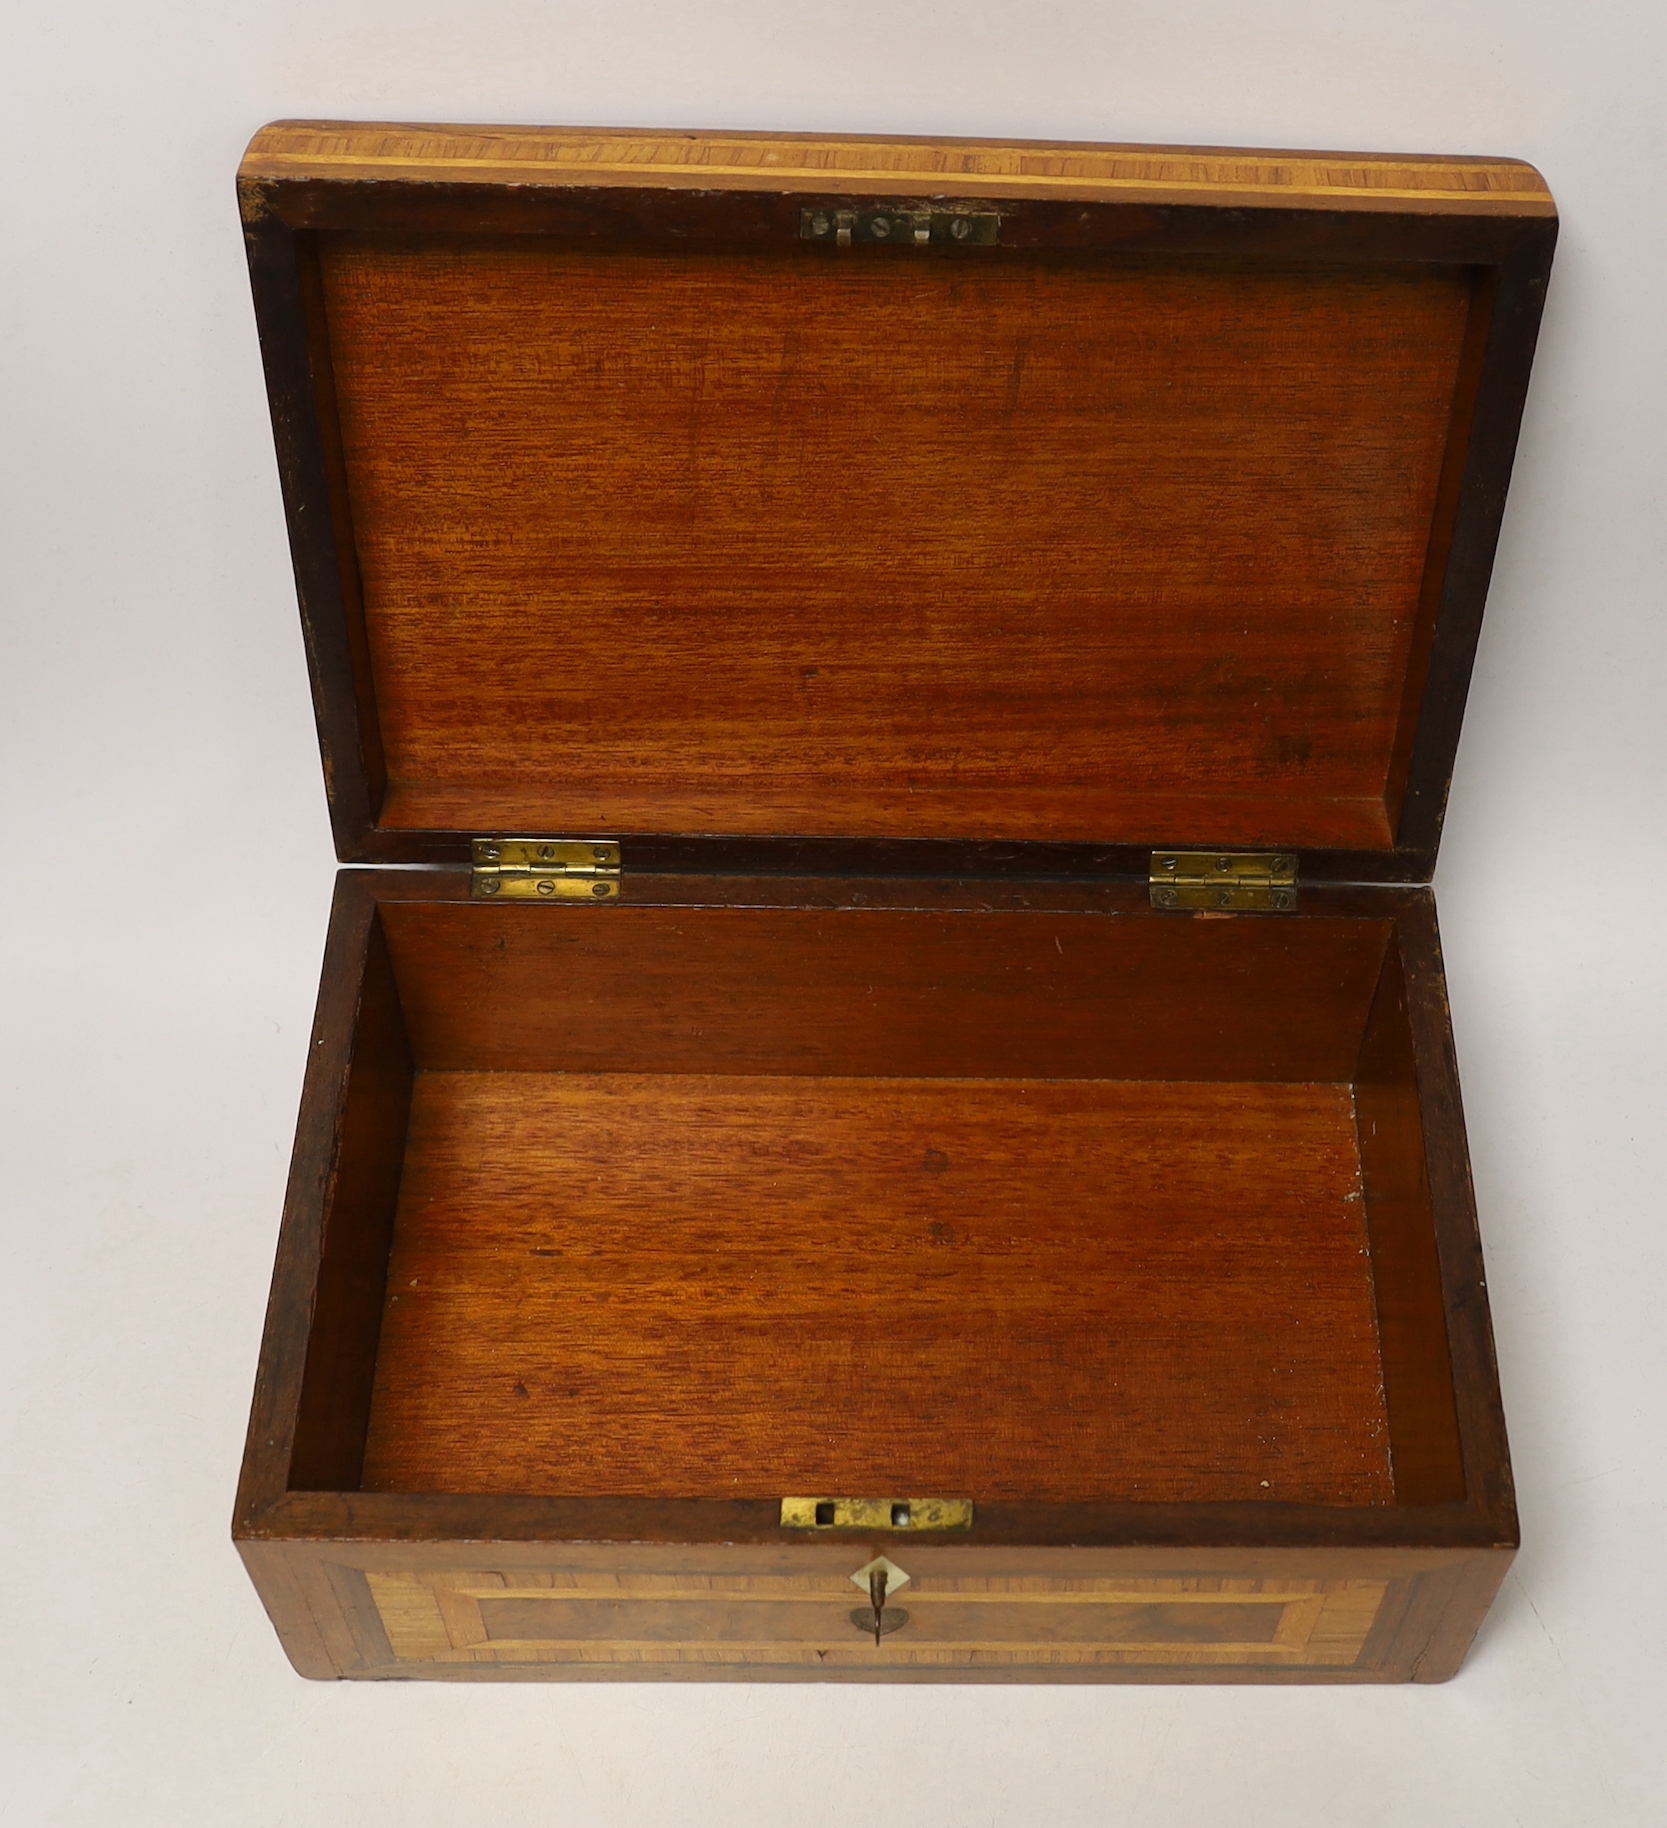 Letter scales and weights, a inlaid box, a carved box, a pair of plated coasters, carriage clock, inlaid box 33cm wide x 13cm high